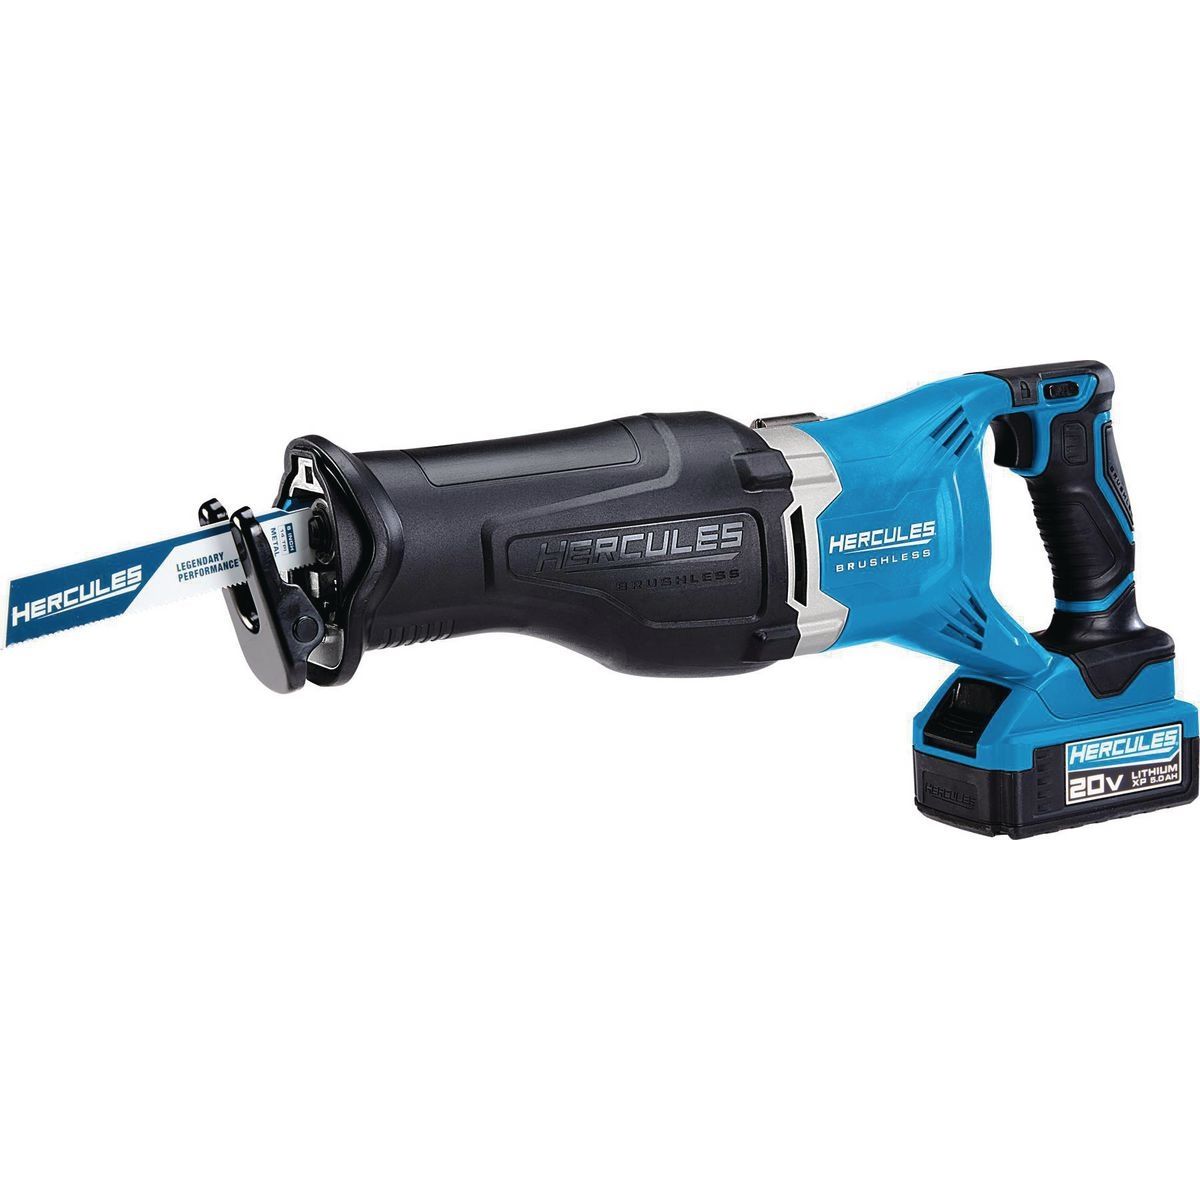 HERCULES 20V Brushless Cordless Reciprocating Saw - Tool Only